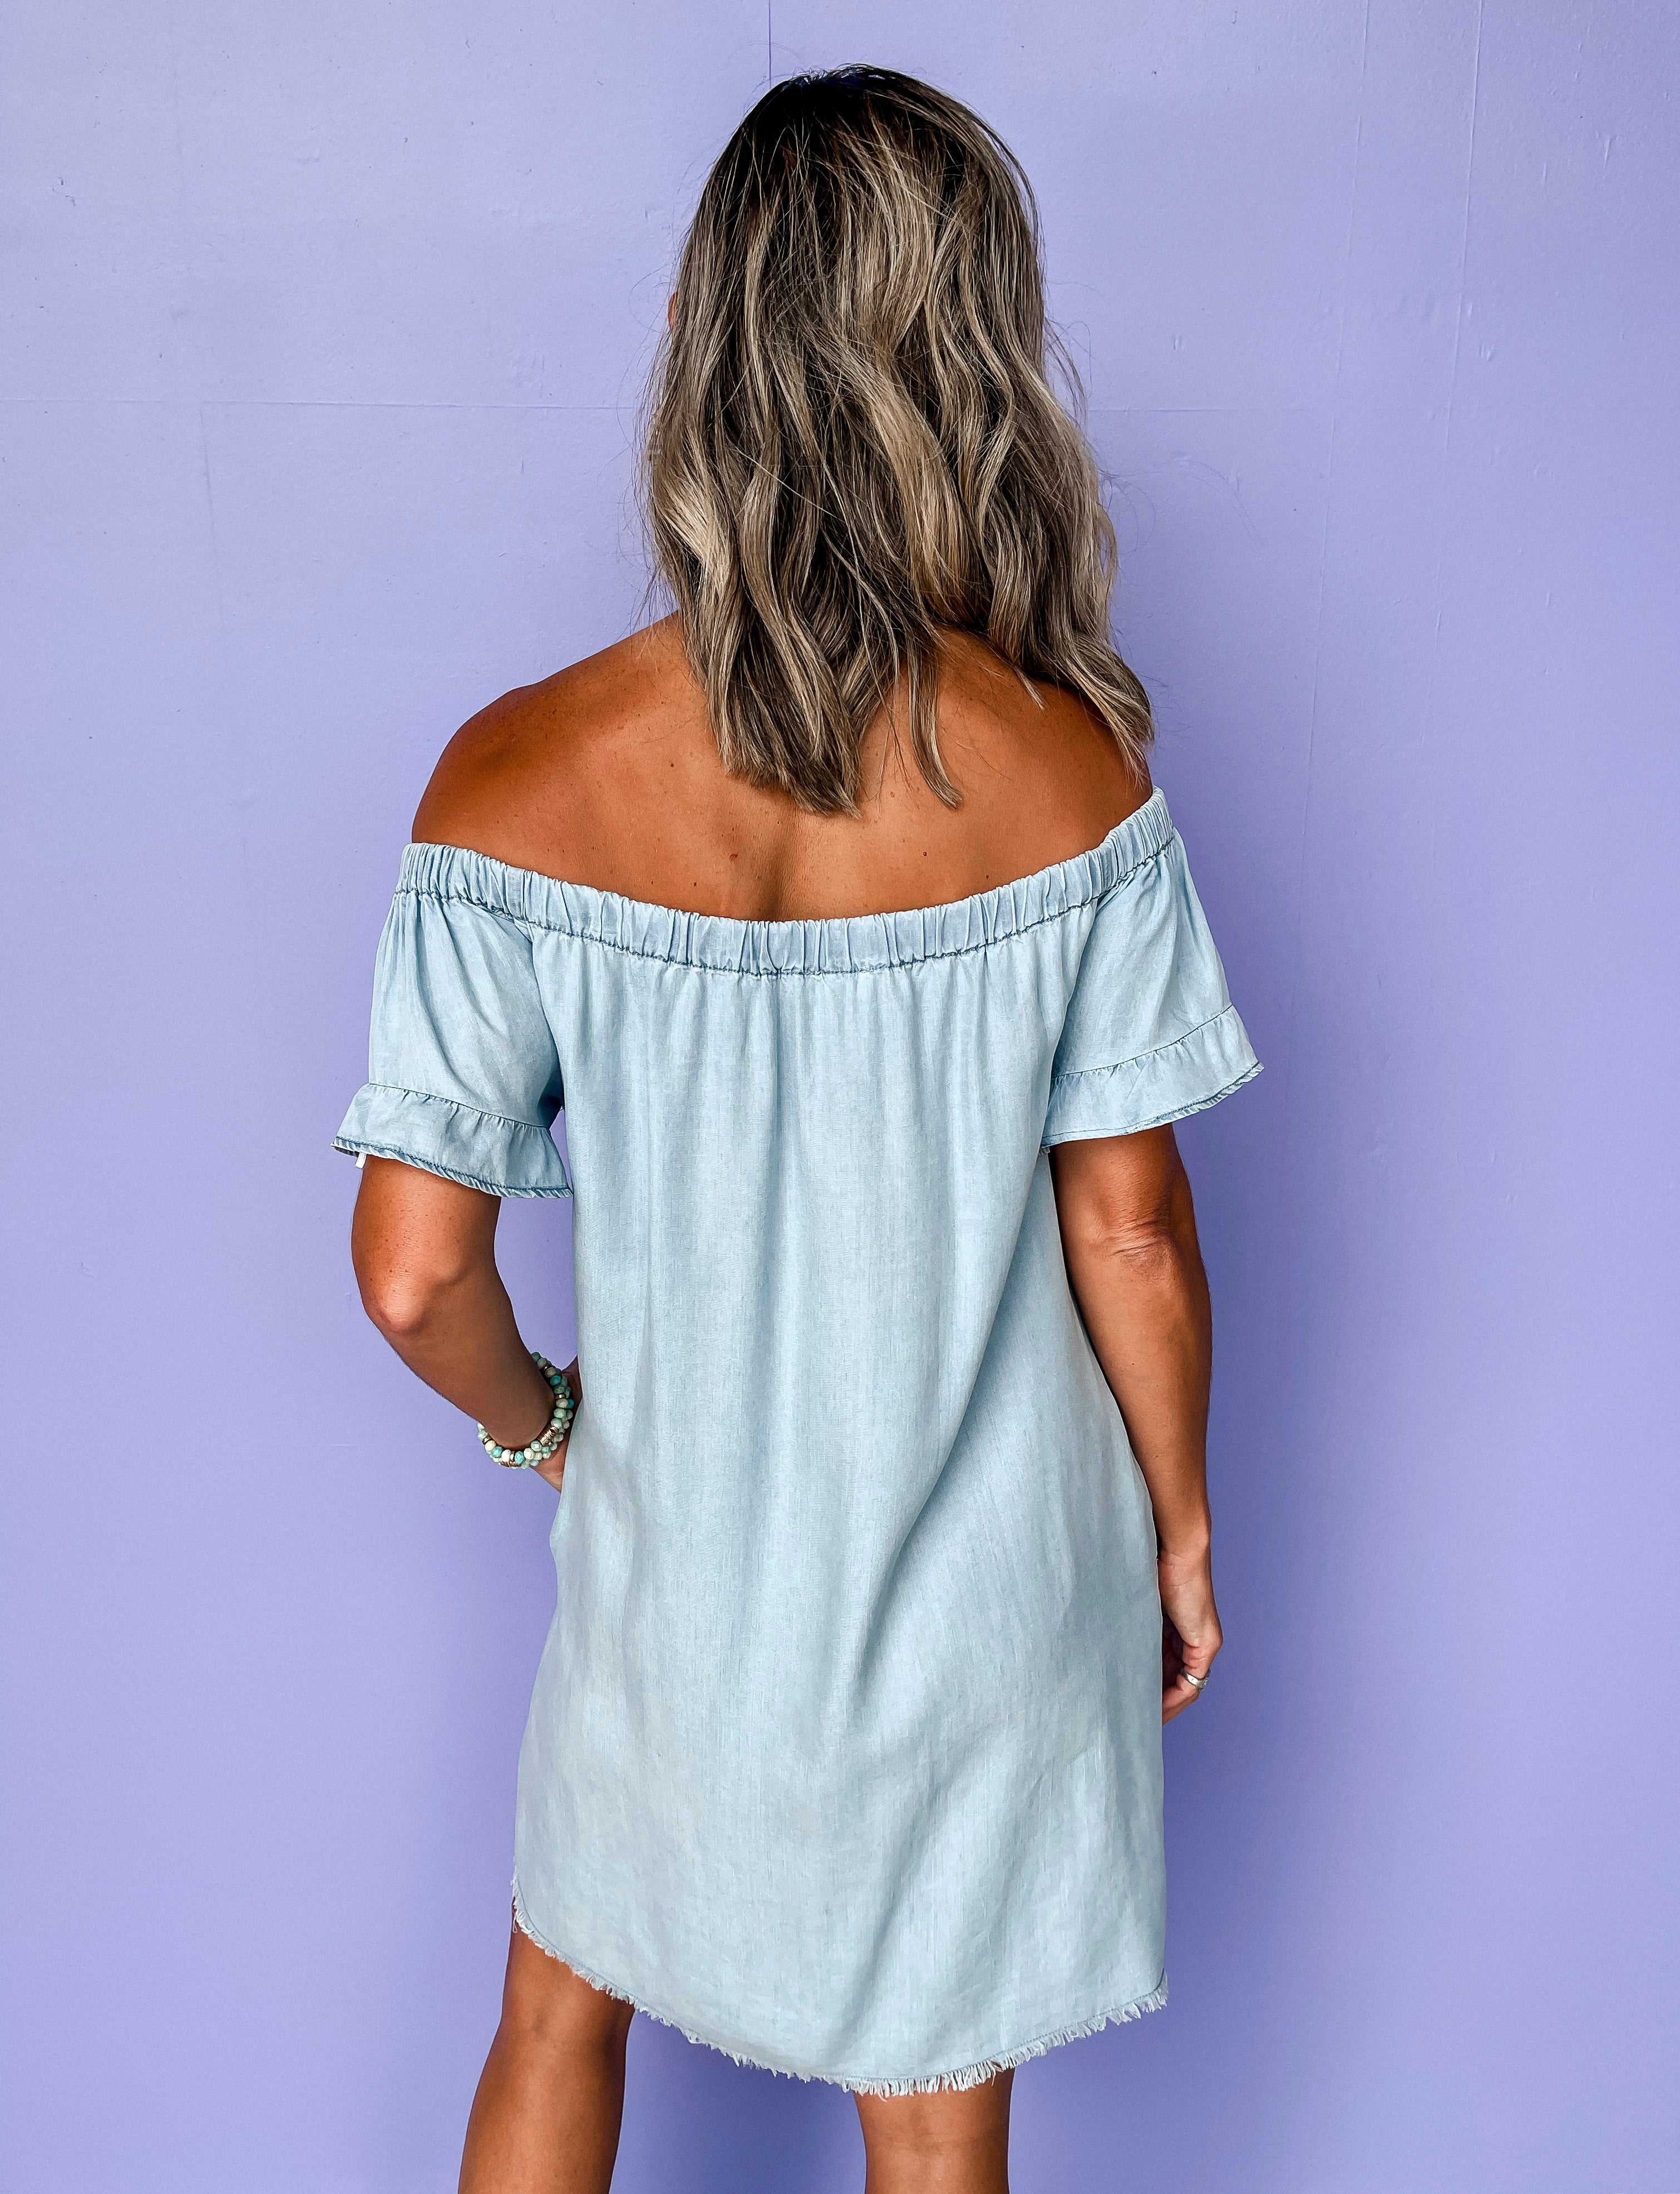 Thoughtful Words Off The Shoulder Dress